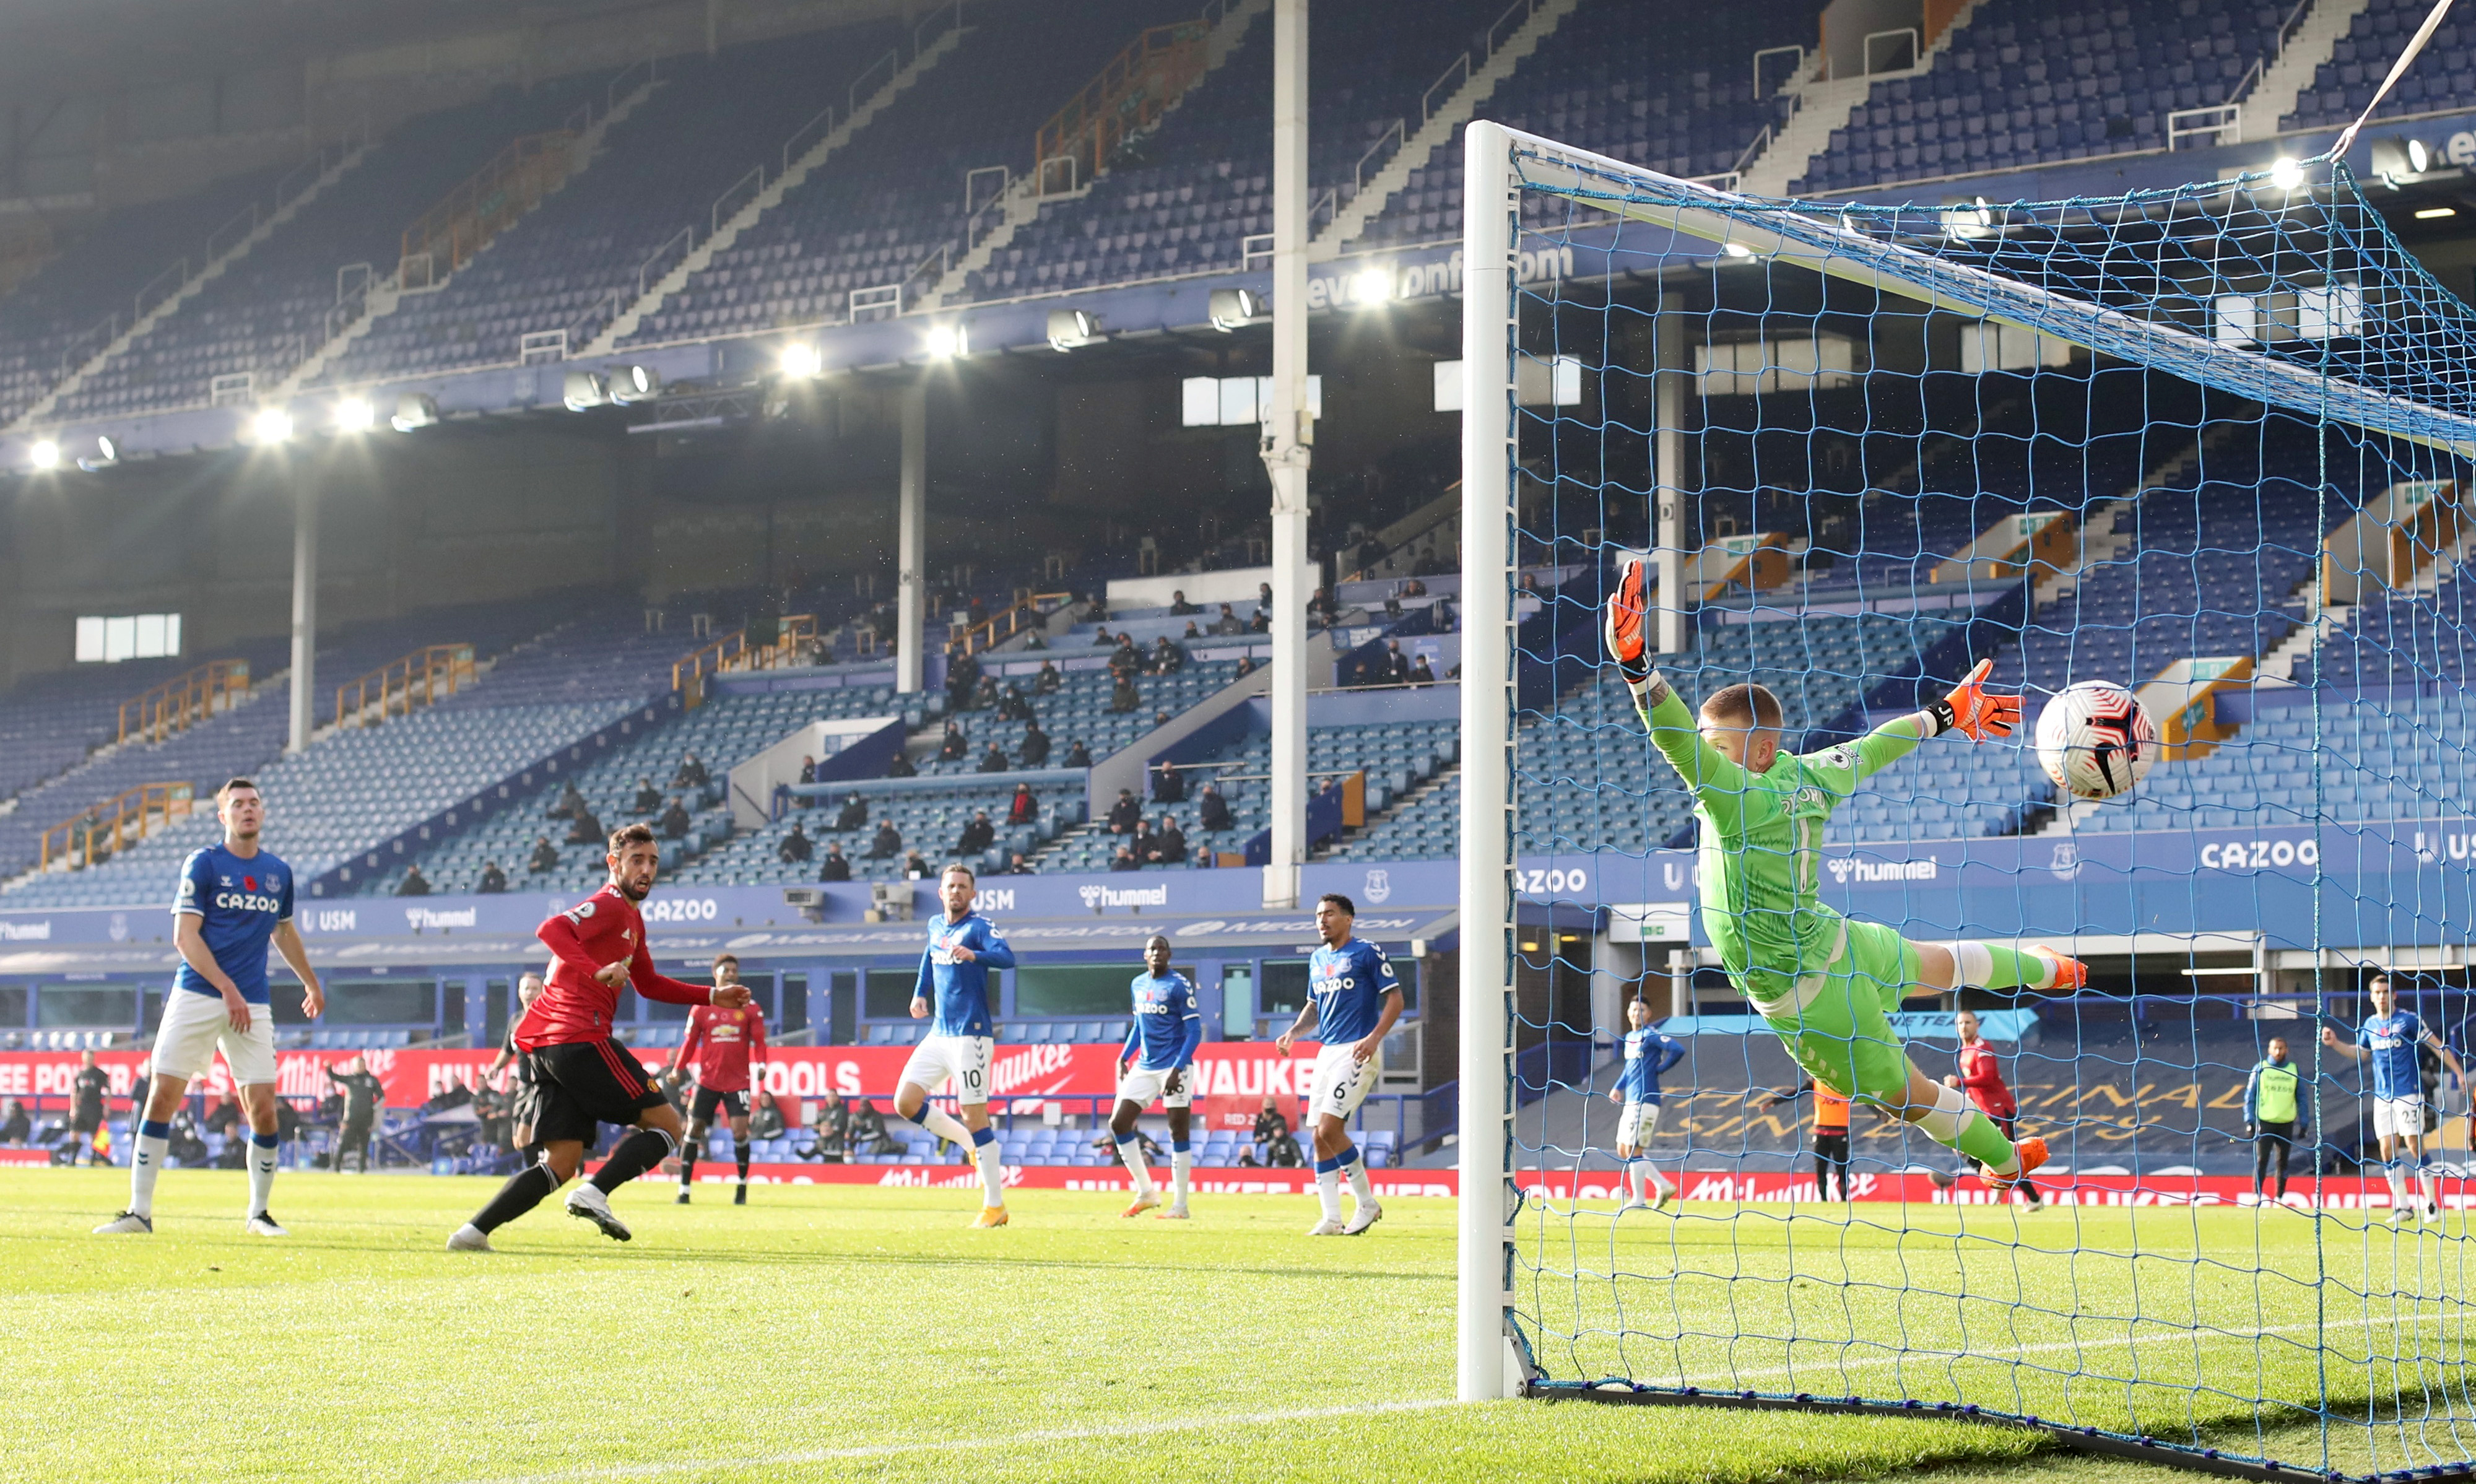 Manchester United's Bruno Fernandes scores their first goal  during the Premier League match between Everton and Manchester United, at Goodison Park, in Liverpool, Britain, on November 7, 2020. Photo: Pool via Reuters